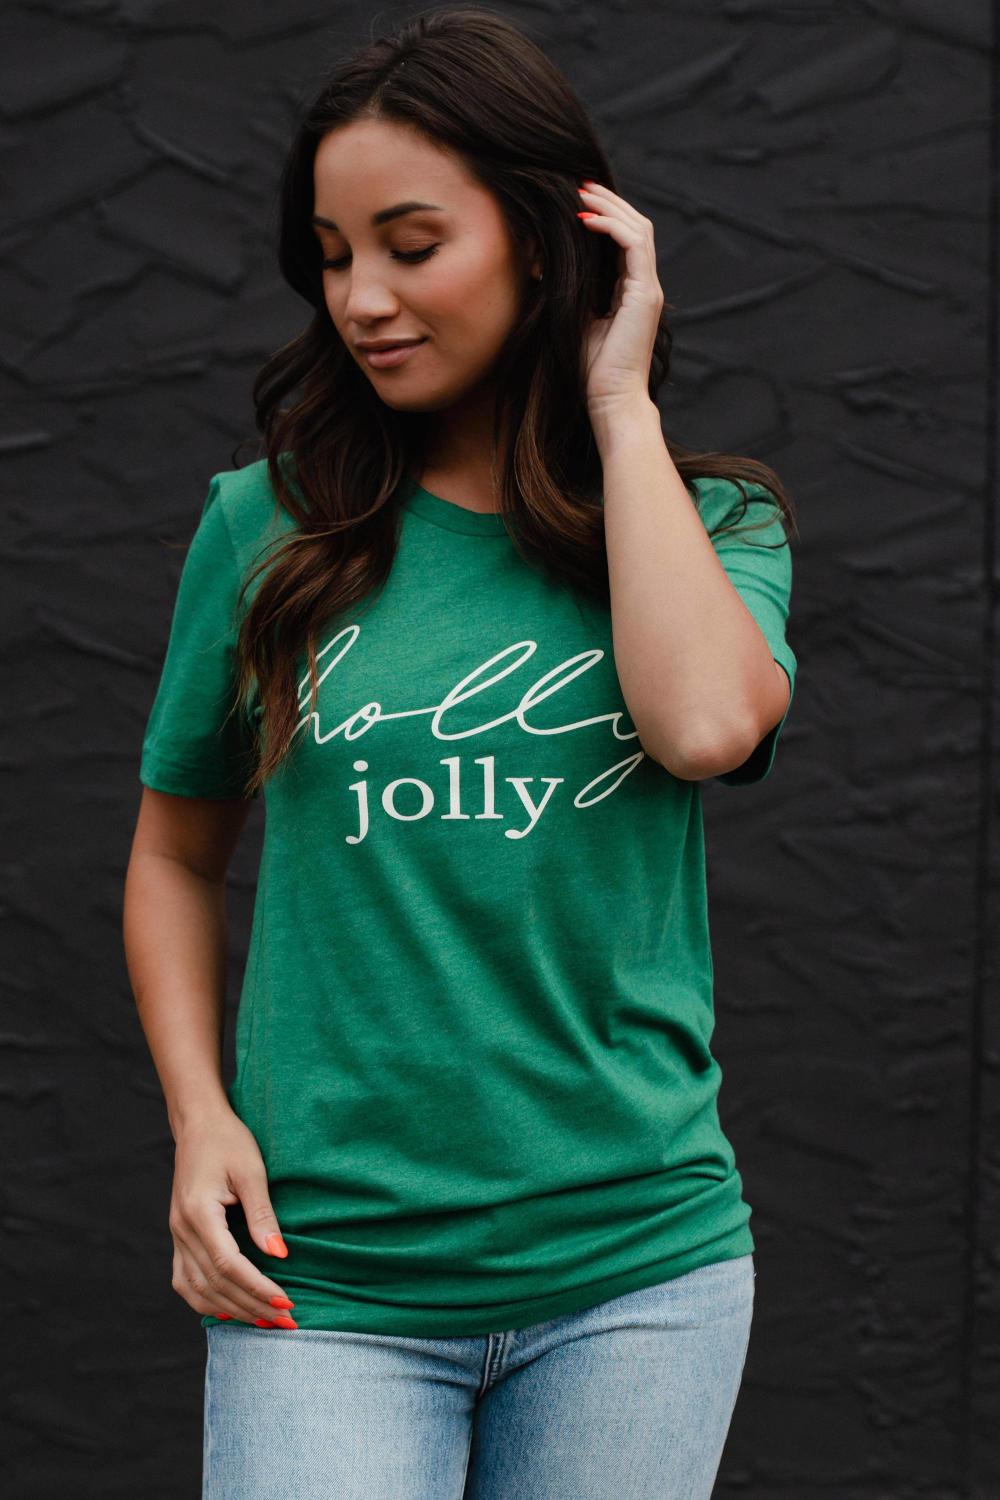 Holly Jolly Tee - Strawberry Moon Boutique